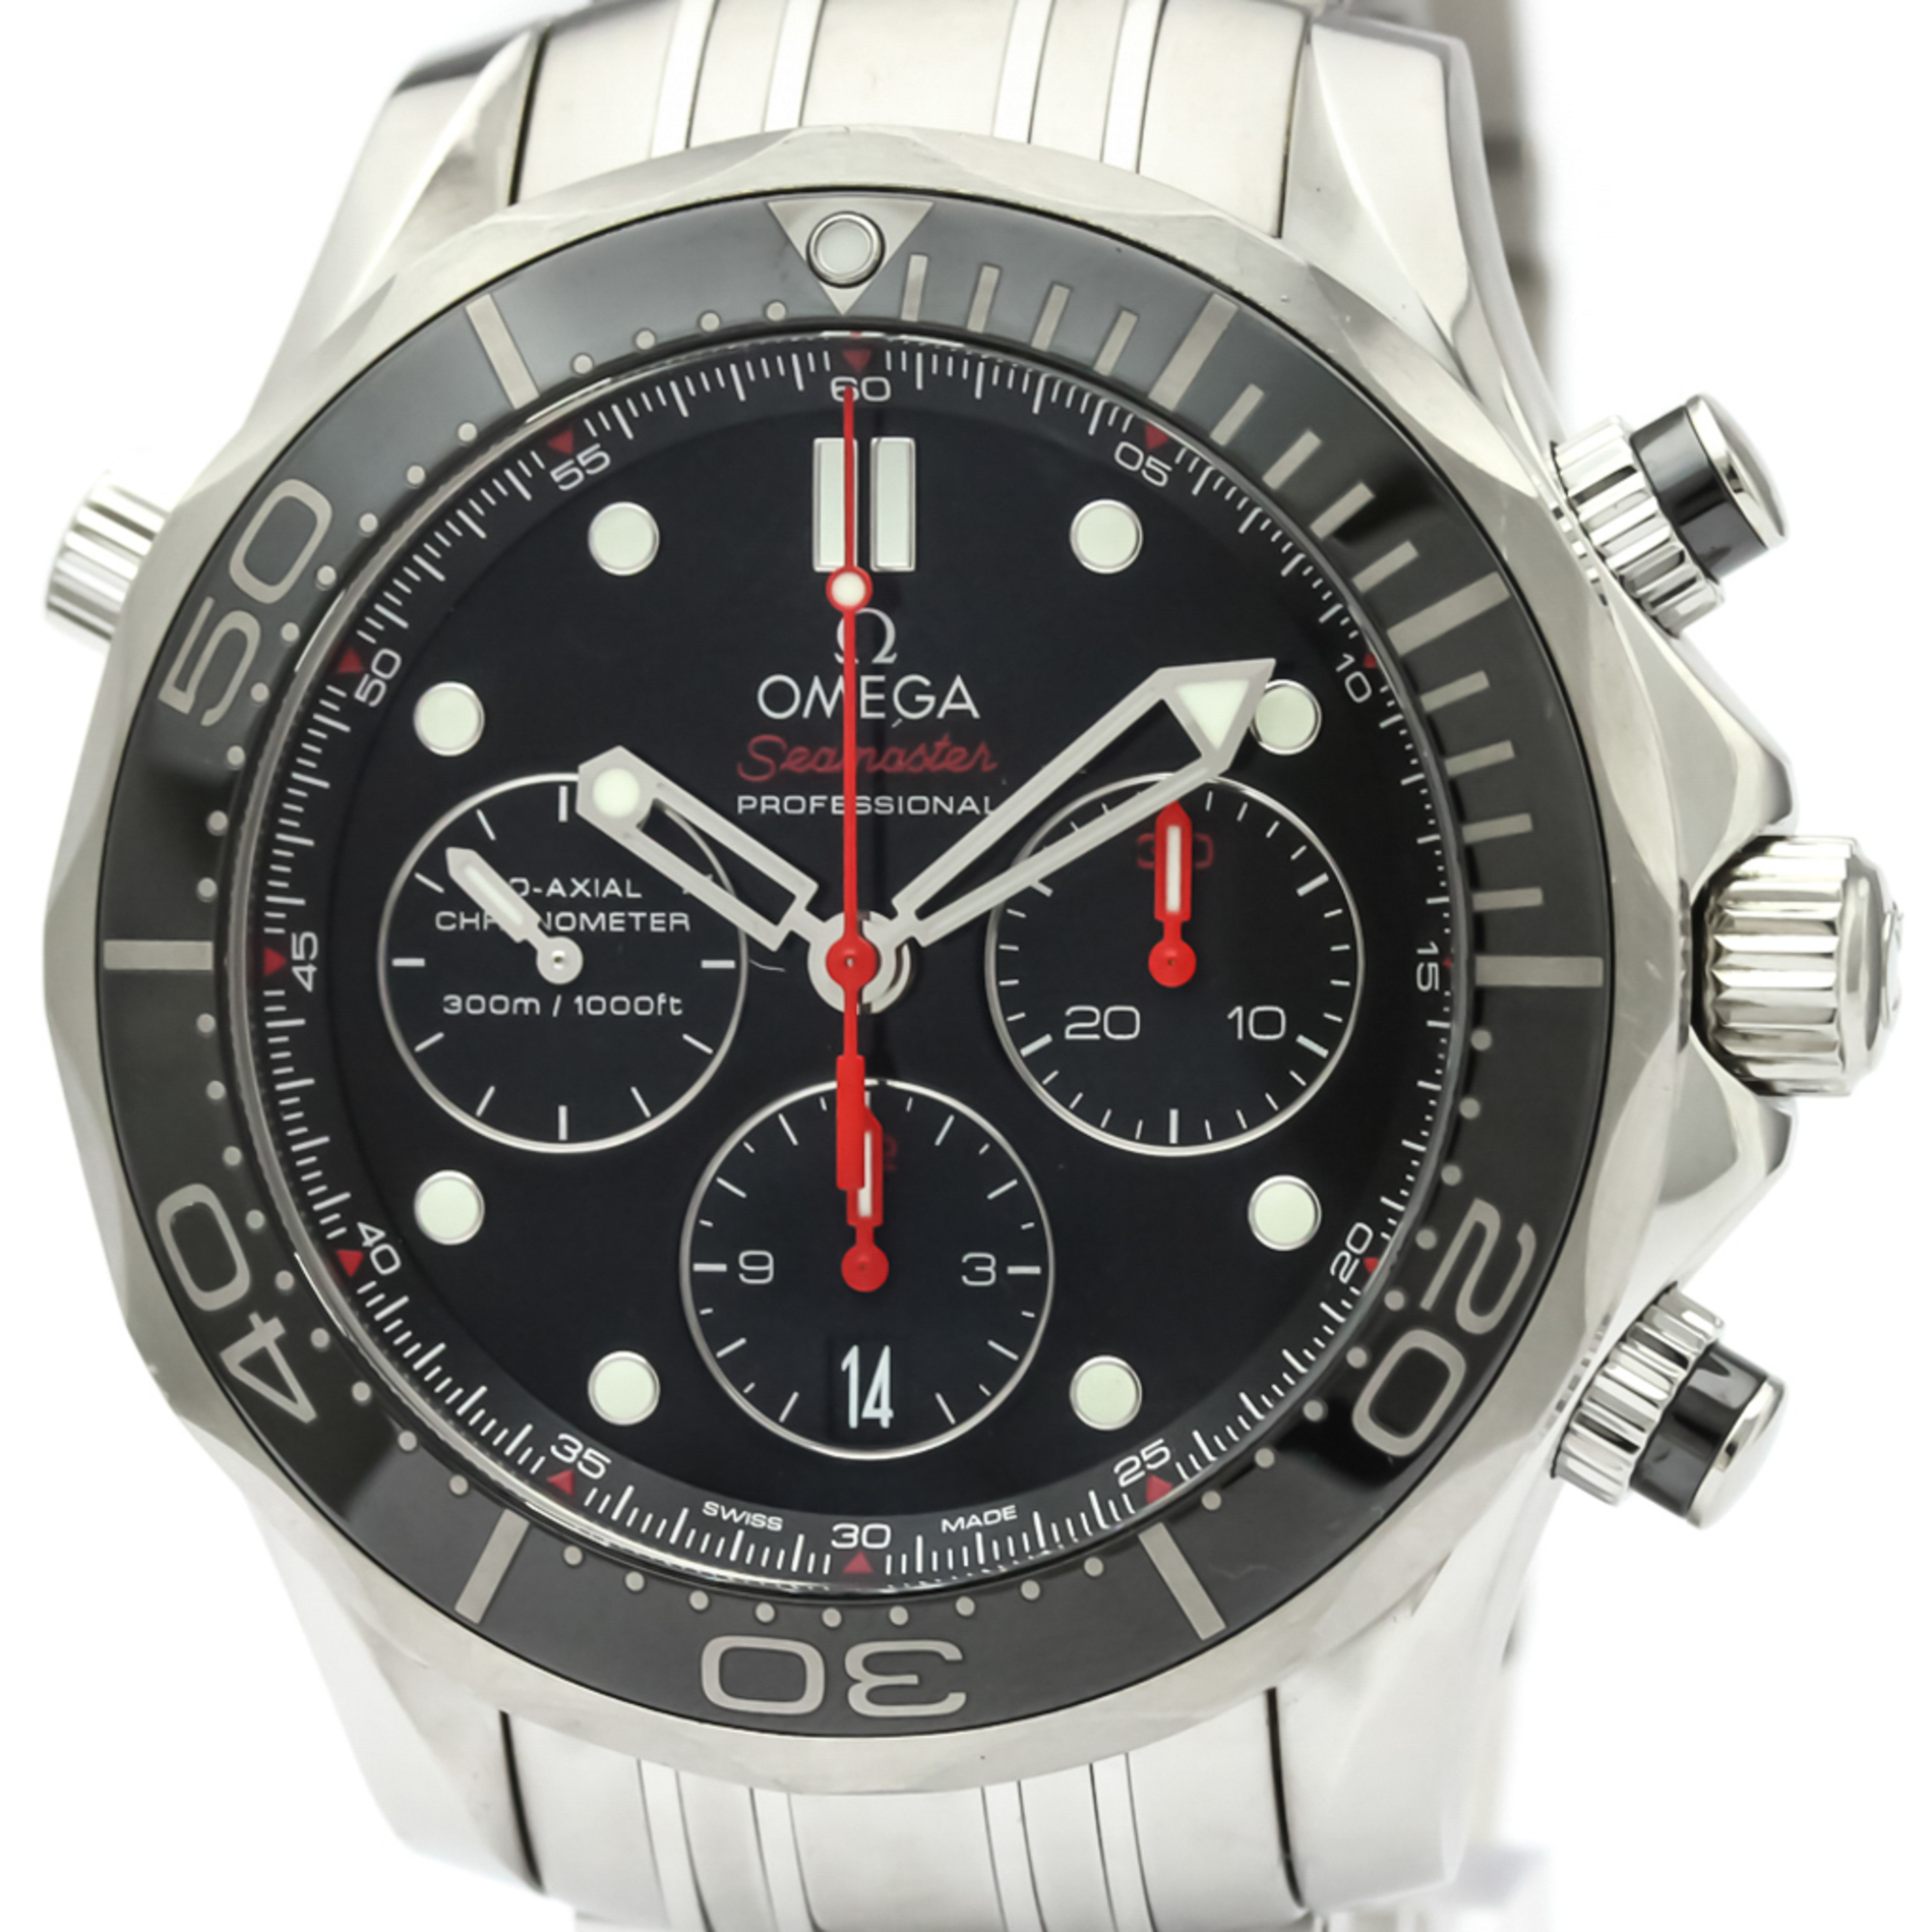 Omega Seamaster Automatic Stainless Steel Men's Sports Watch 212.30.44.50.01.001